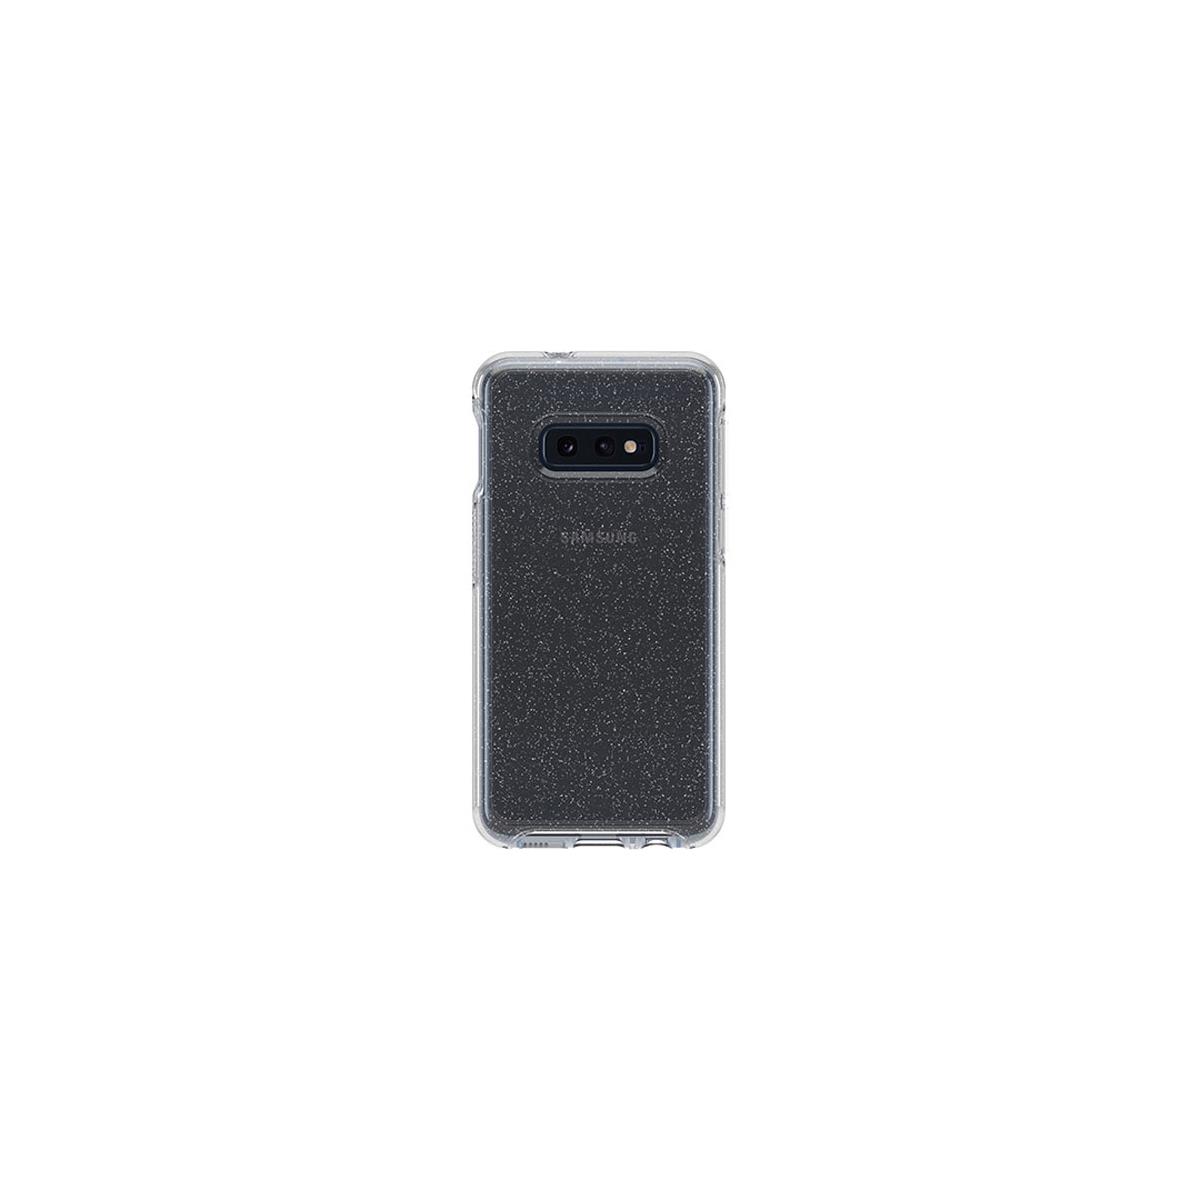 Image of OtterBox Symmetry Series Clear Case for Samsung Galaxy S10e Smartphone